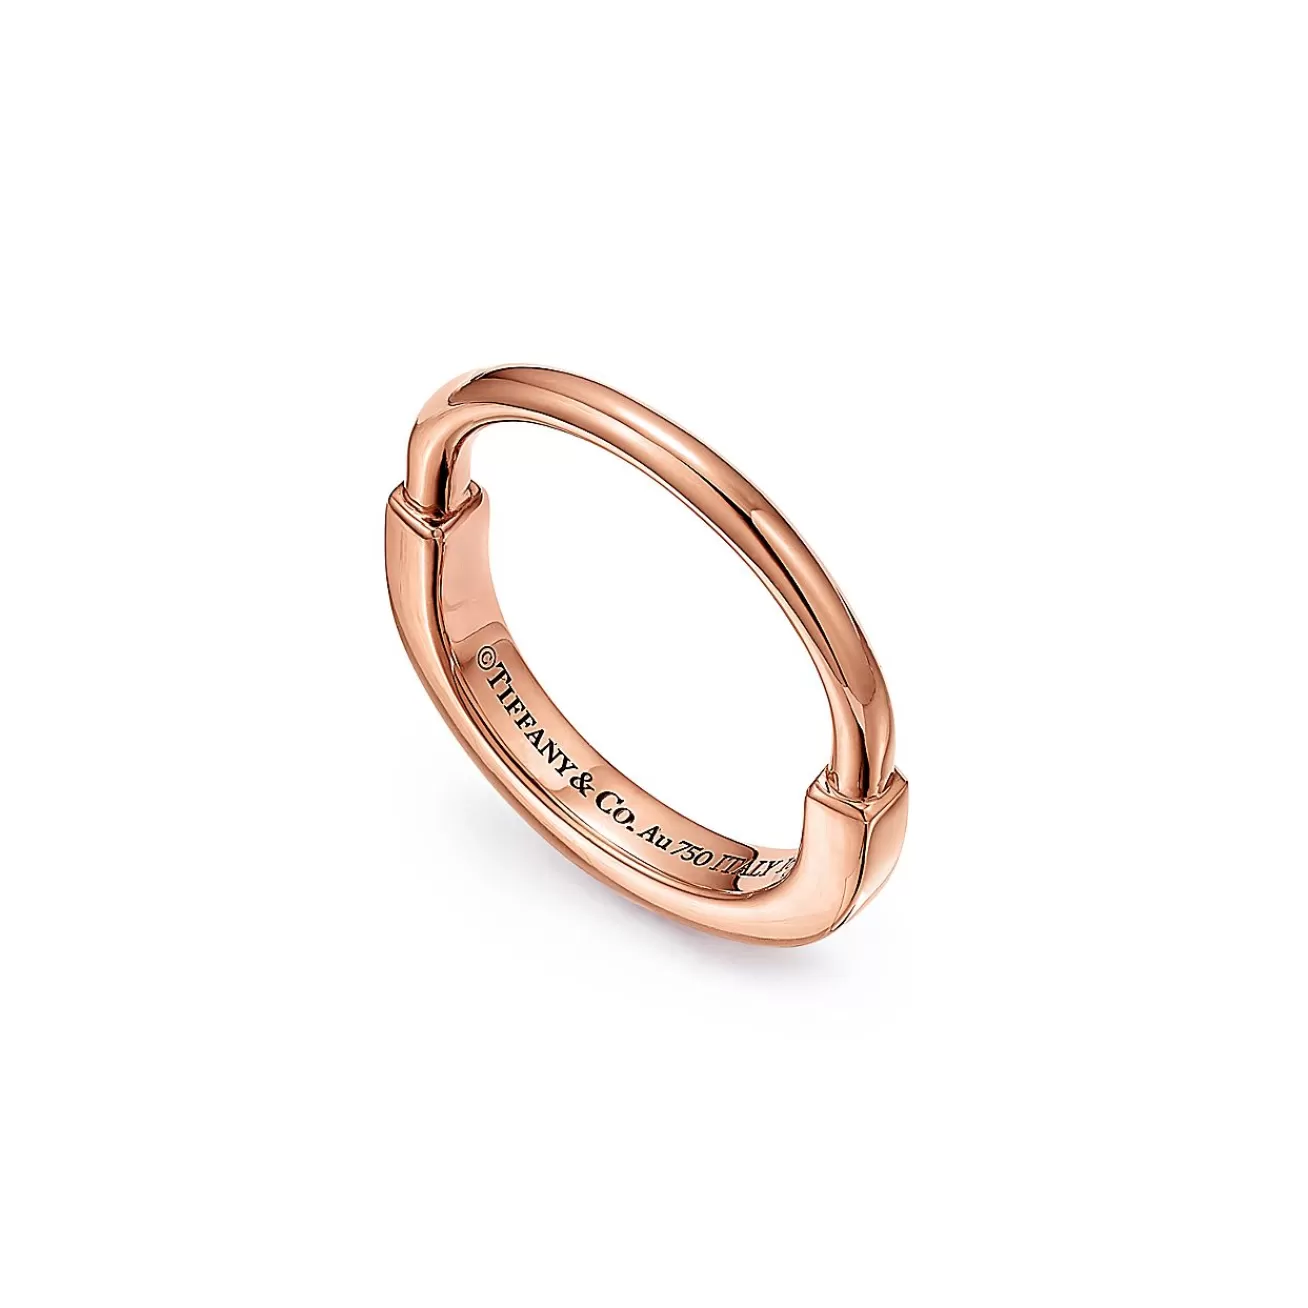 Tiffany & Co. Tiffany Lock Ring in Rose Gold | ^ Rings | Stacking Rings